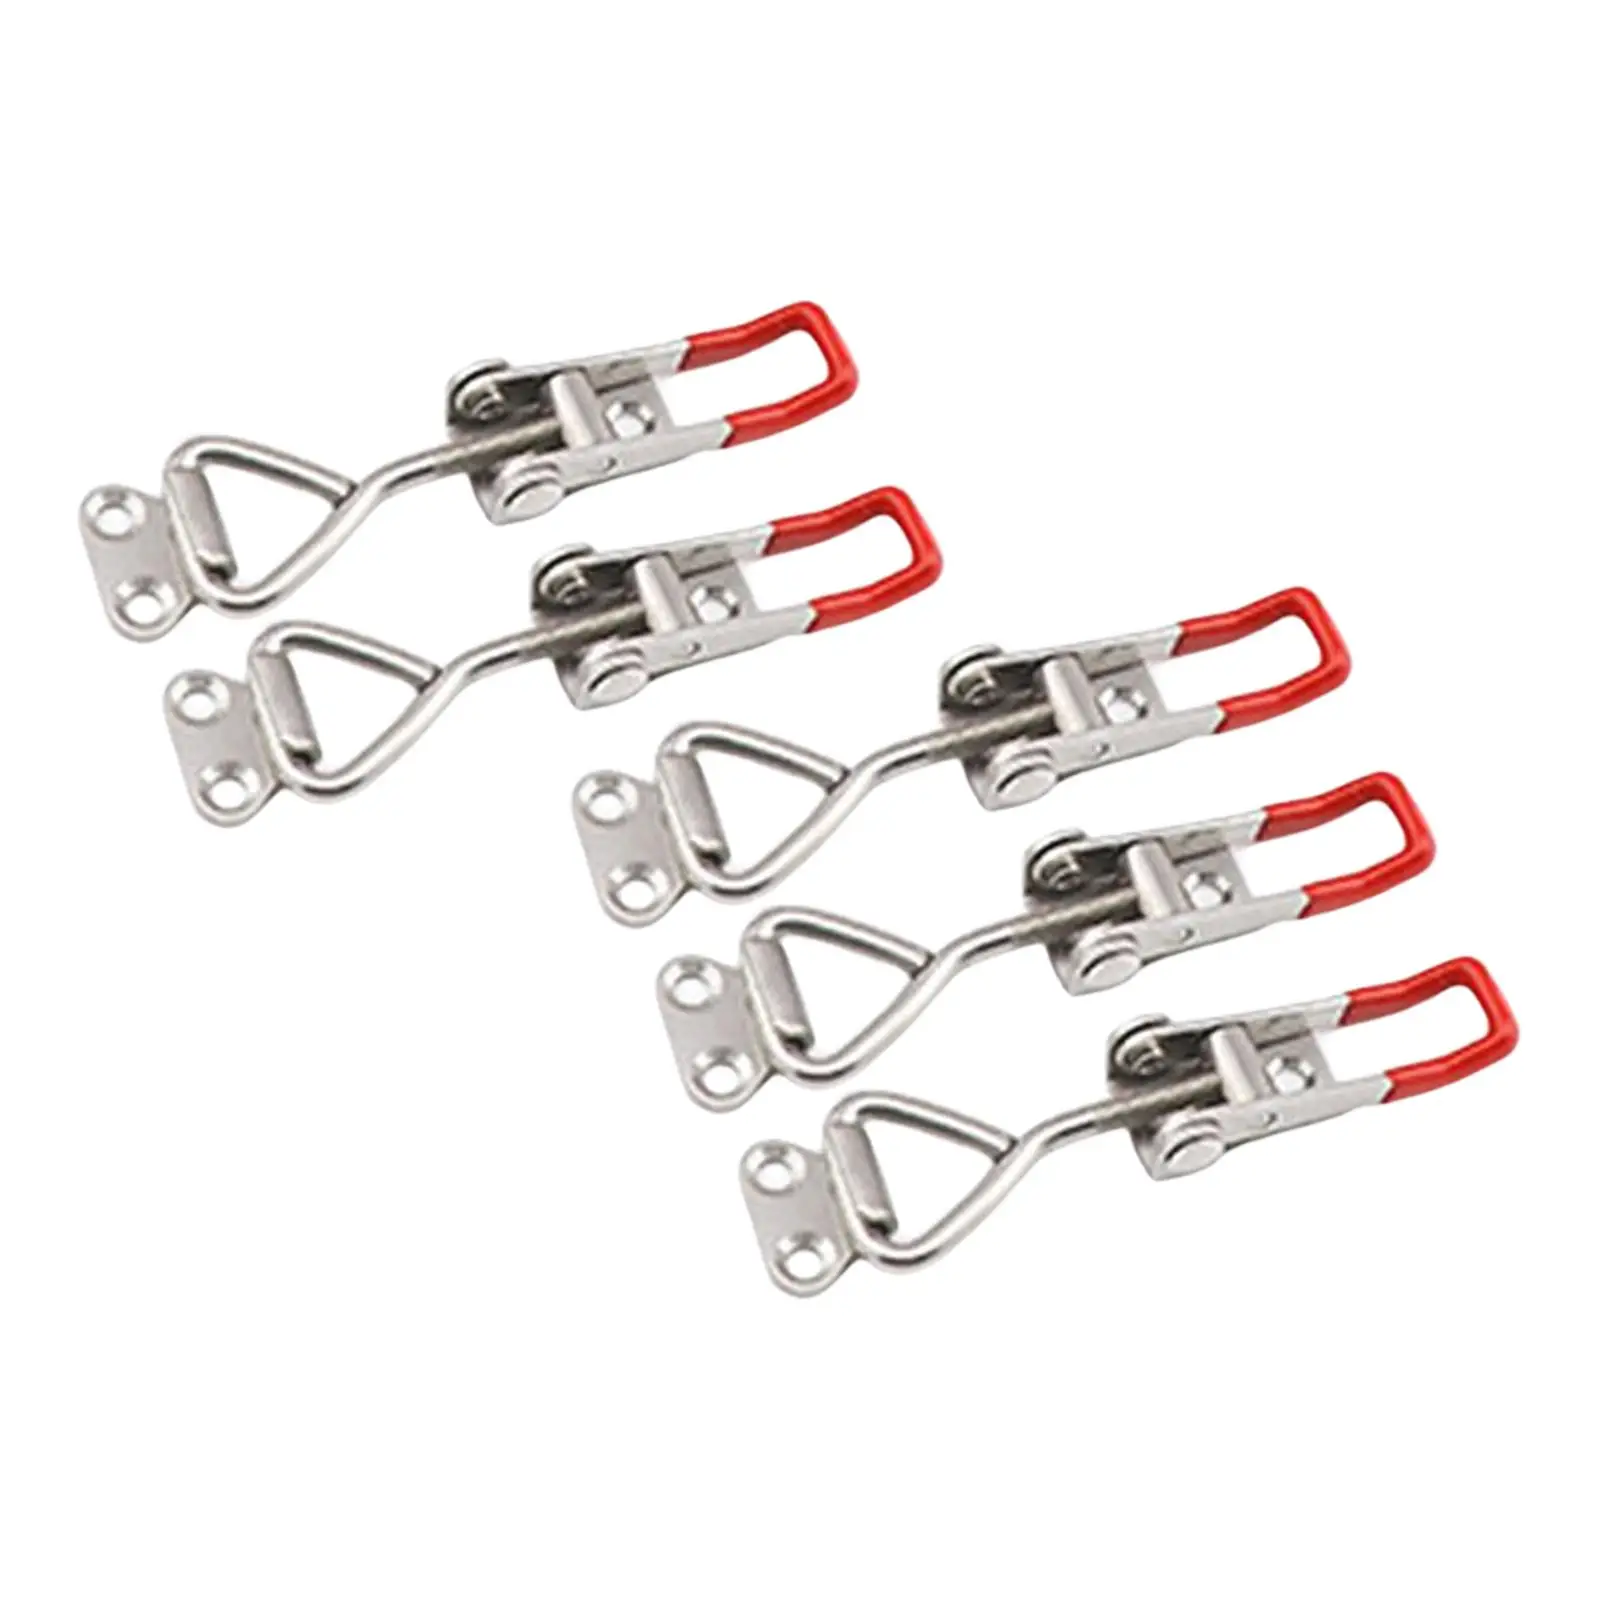 5Pcs Push Pull Action Latch Clamp Steel Reliable Easy to Use Durable Hand Tool Adjustable for Furniture Hardware Tool Box Case